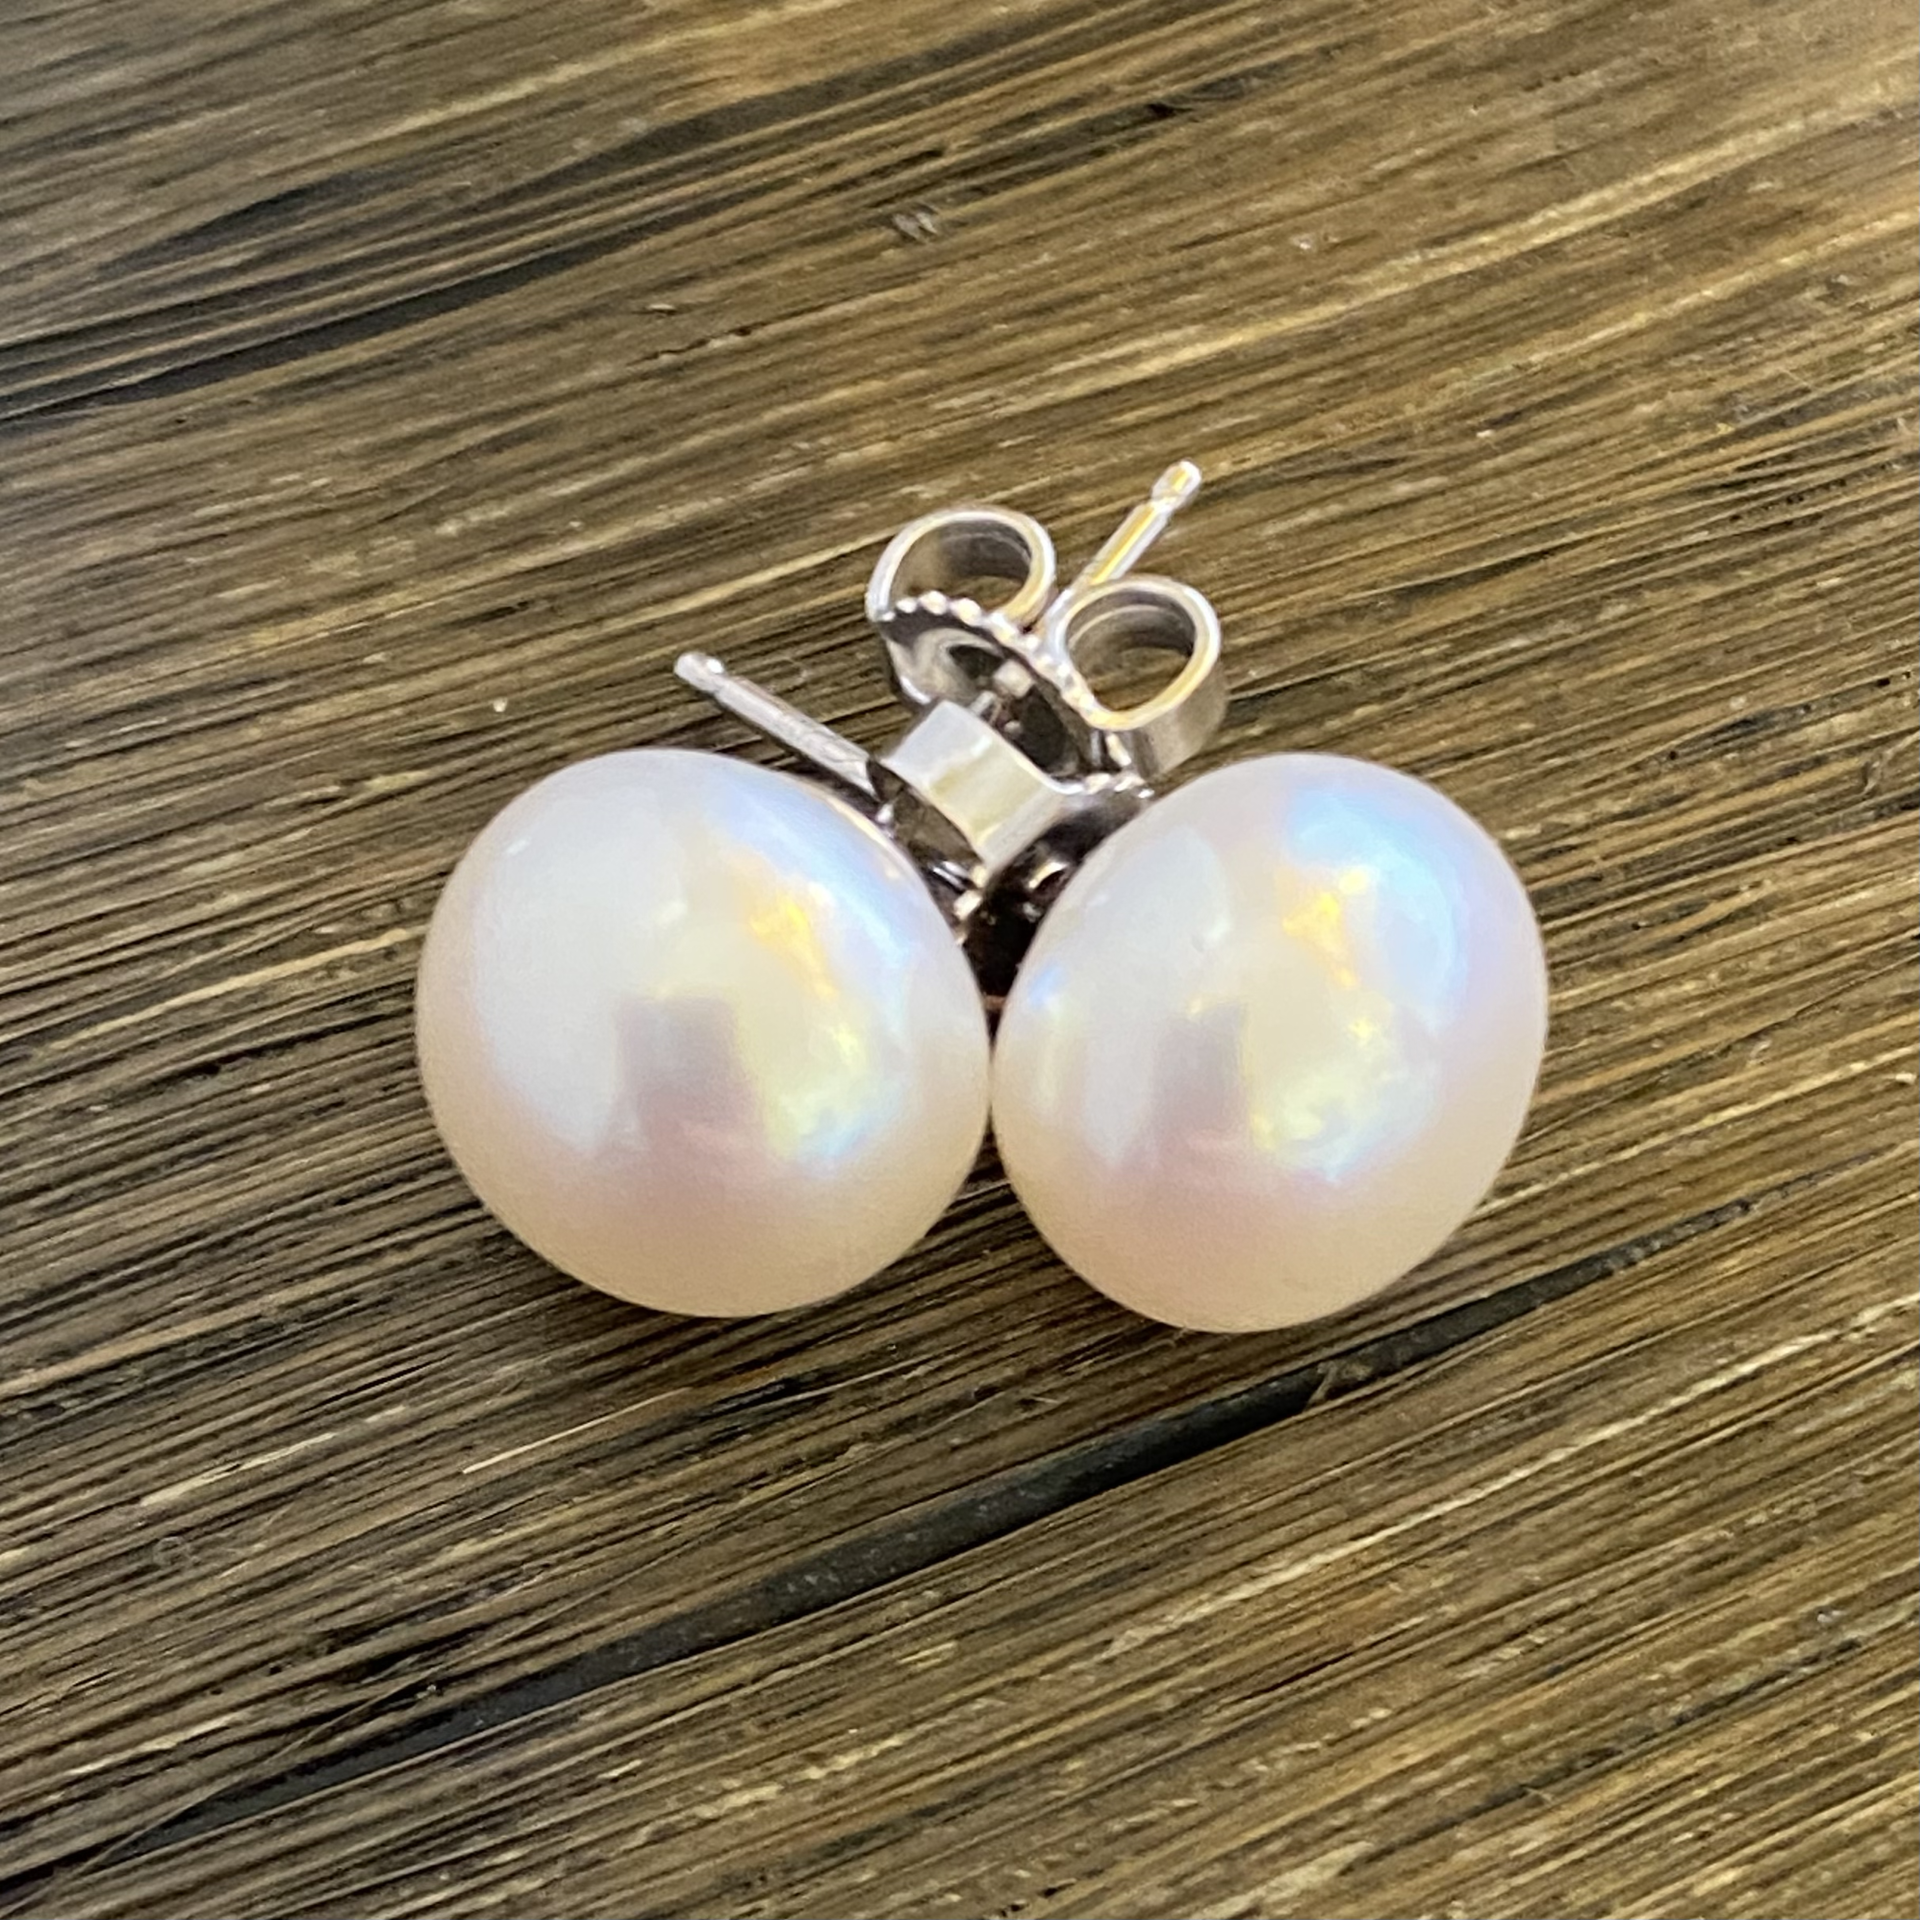 White Pearl Button Earrings 10mm by Sidney Soriano